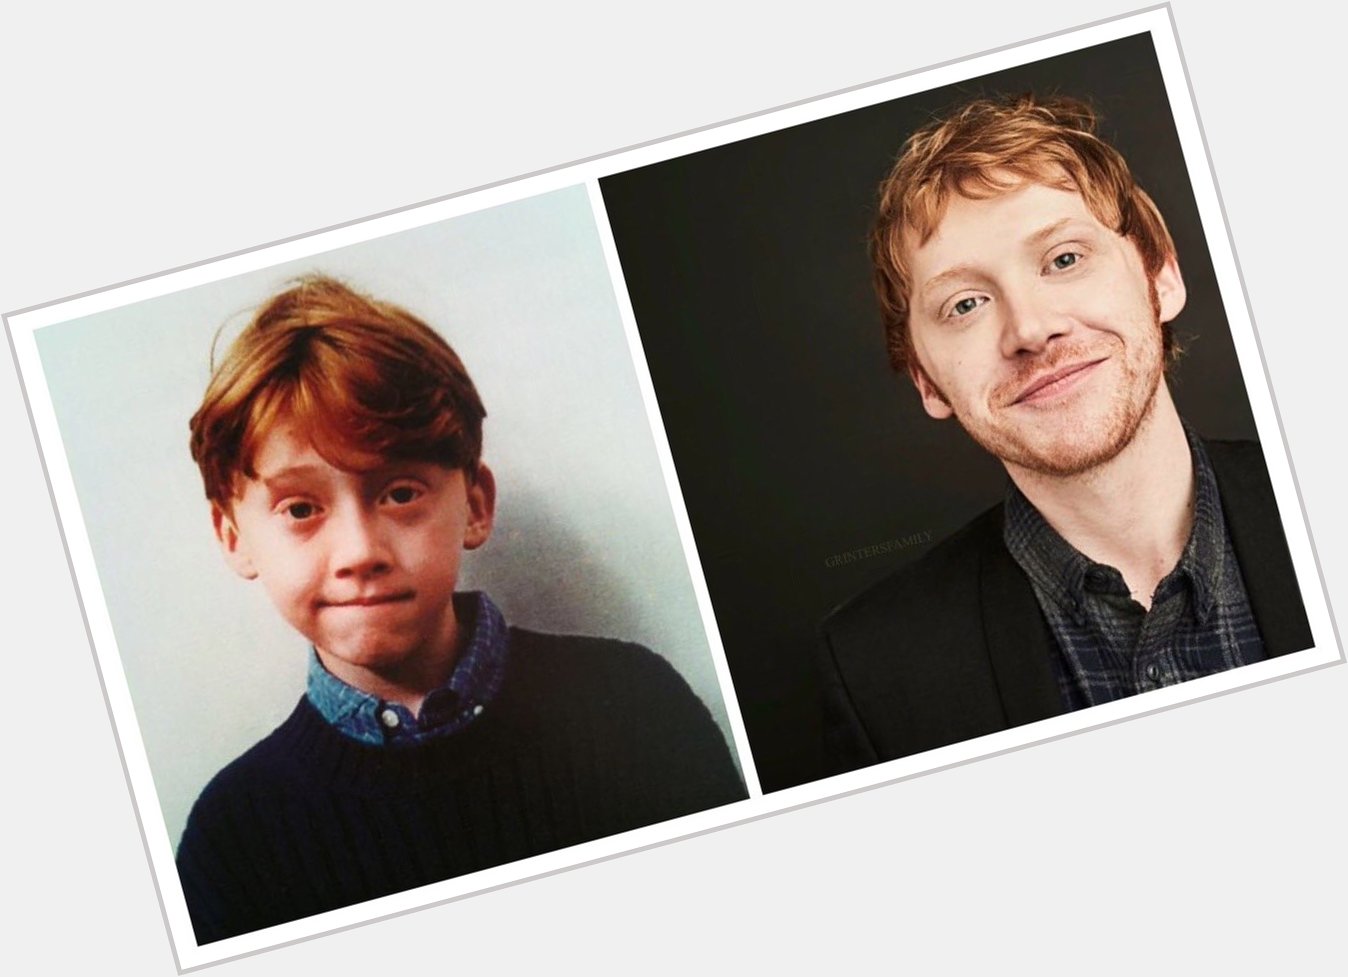 Happy birthday, Rupert Grint. Thank you for bringing Ron Weasley to life for us. 